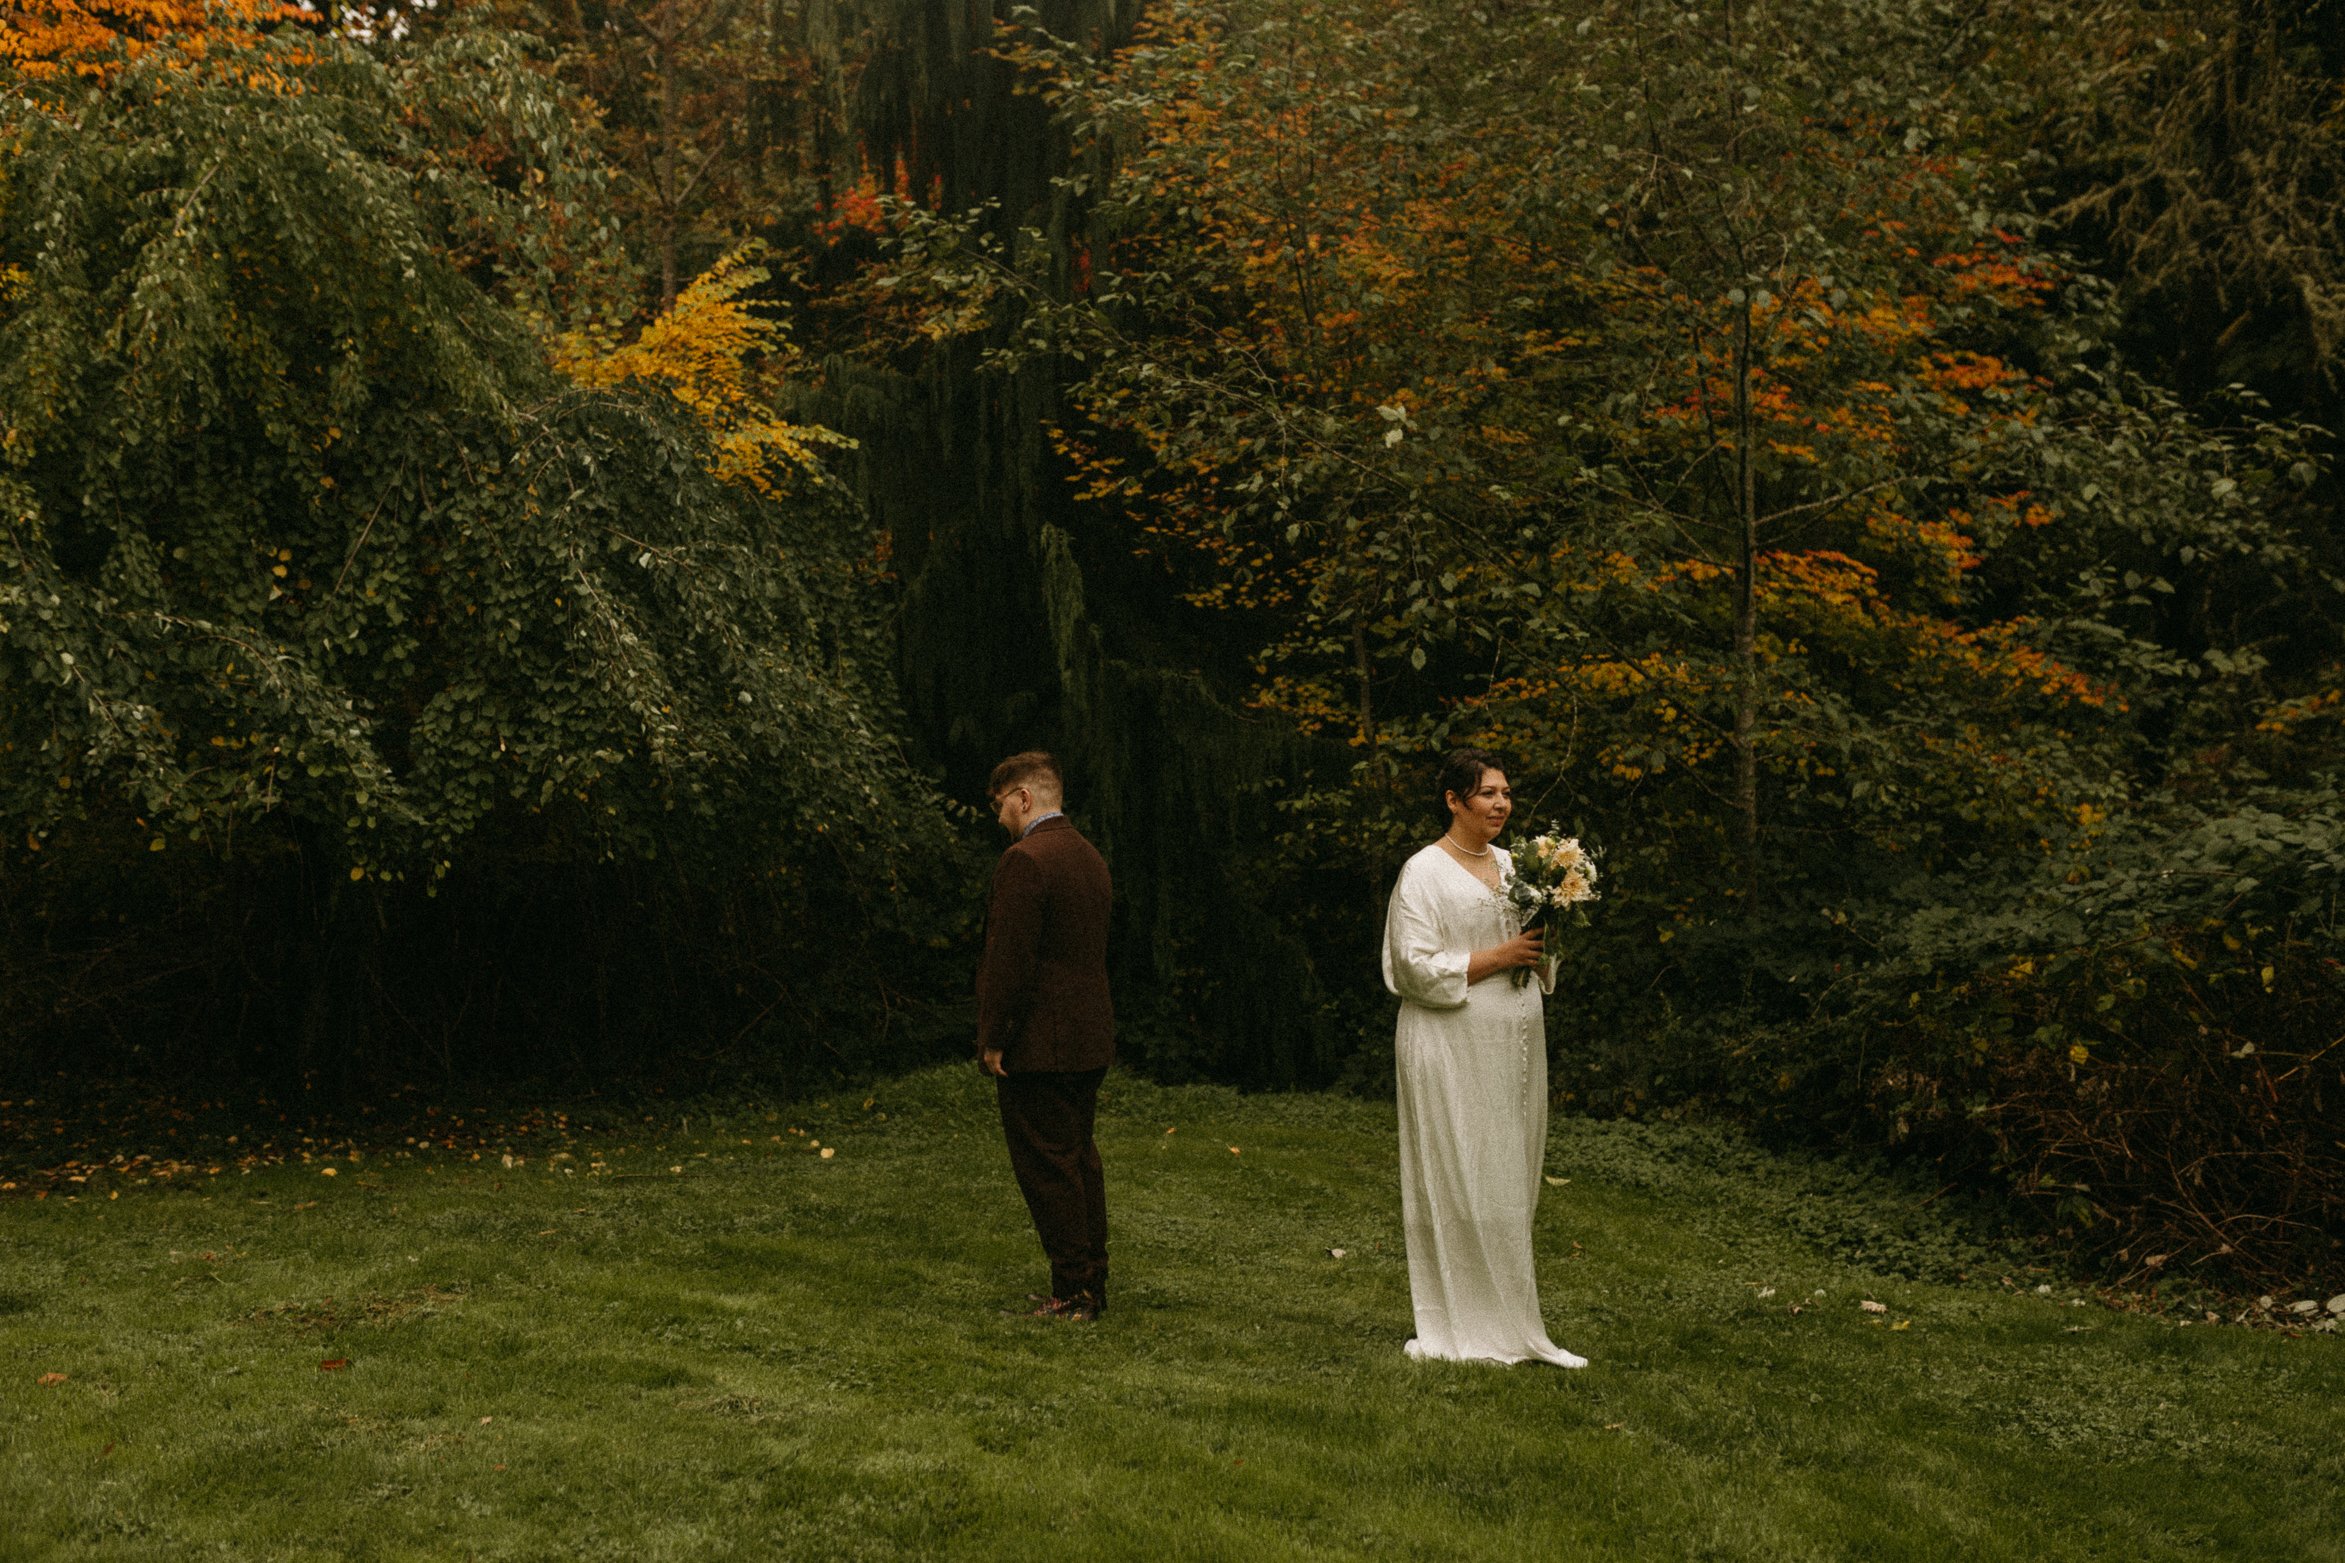 t4t-trans-non-binary-seaside-queer-intimate-wedding-washington-by-genderqueer-elopement-photographer-halle-roland-82.jpg